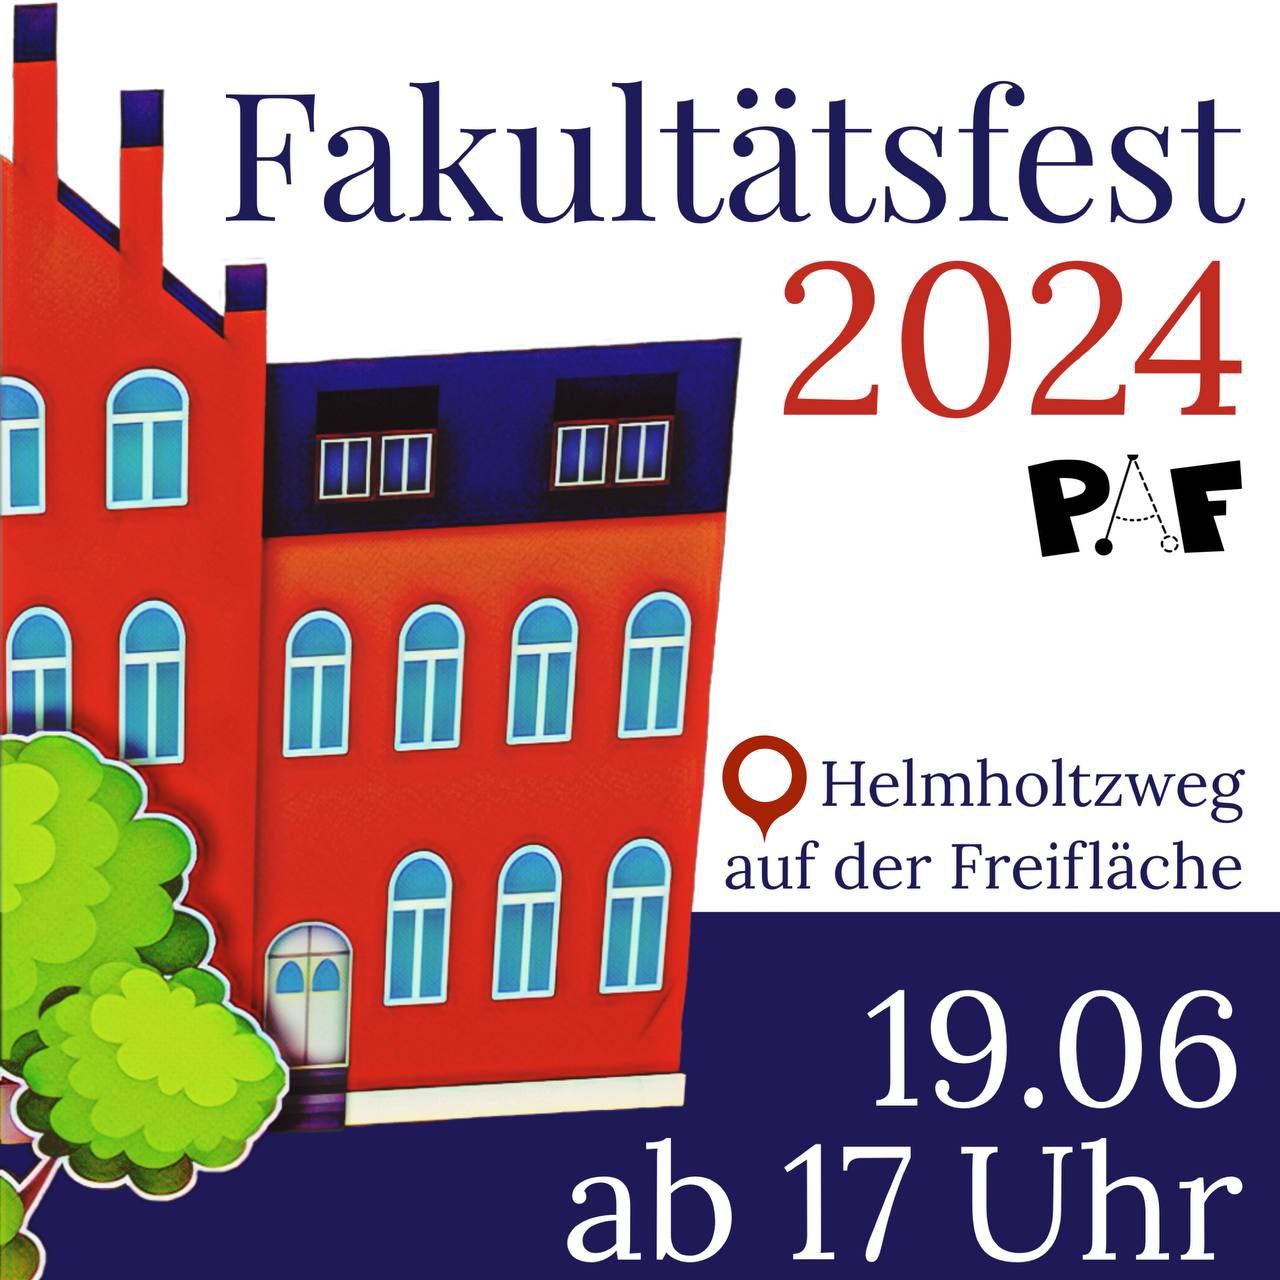 You are currently viewing Fakultätsfest am 19.06.2024